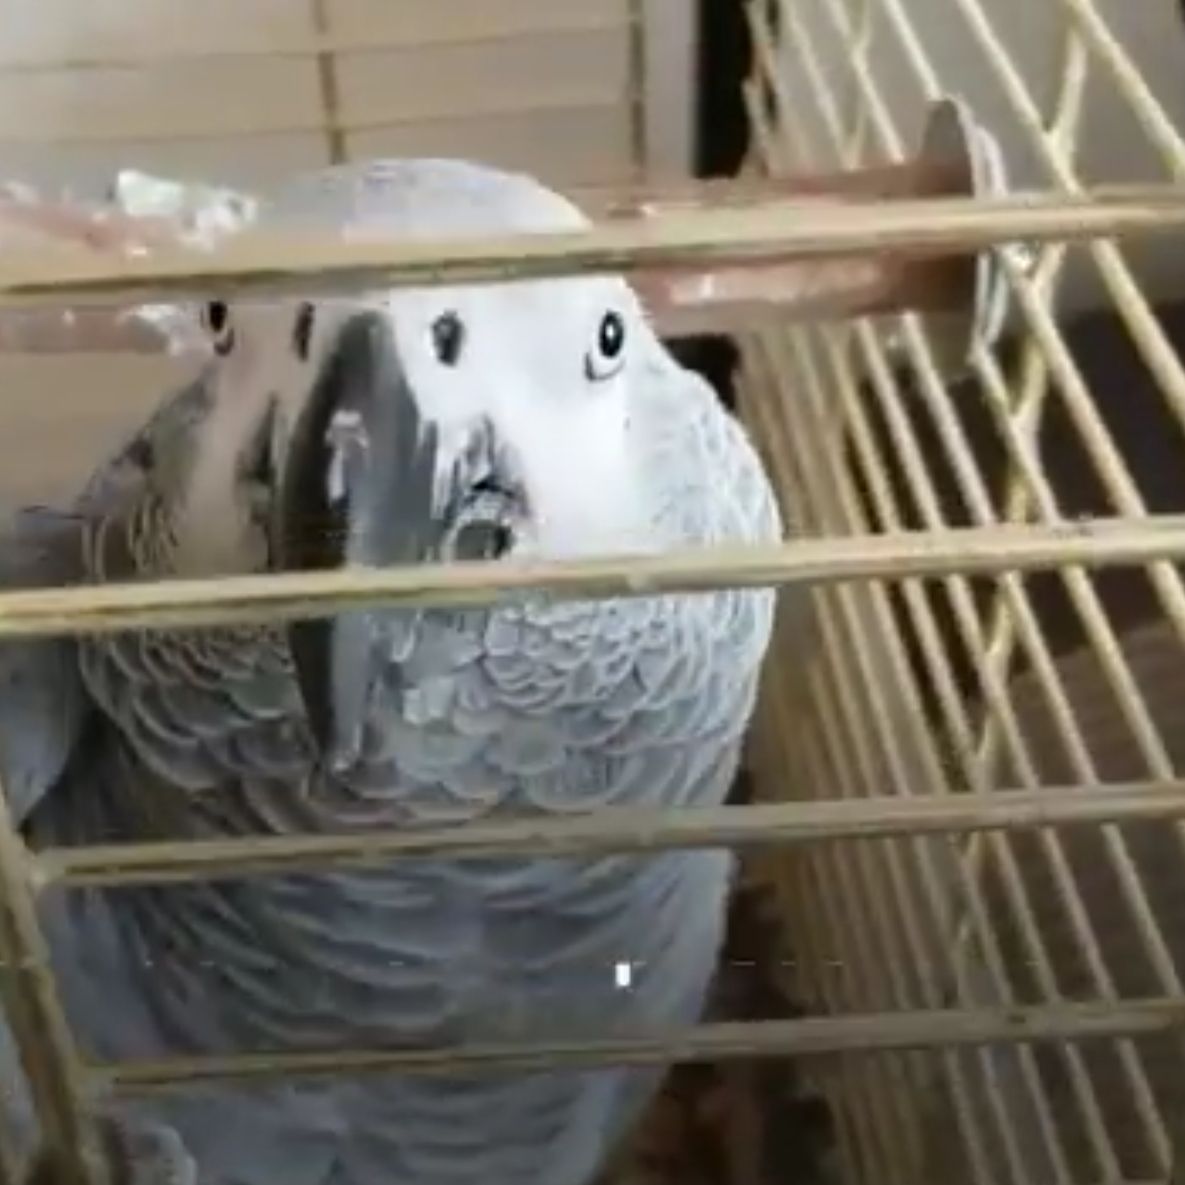 Parrot Sparks An Emergency Call After Impersonating Fire Alarm 🚨